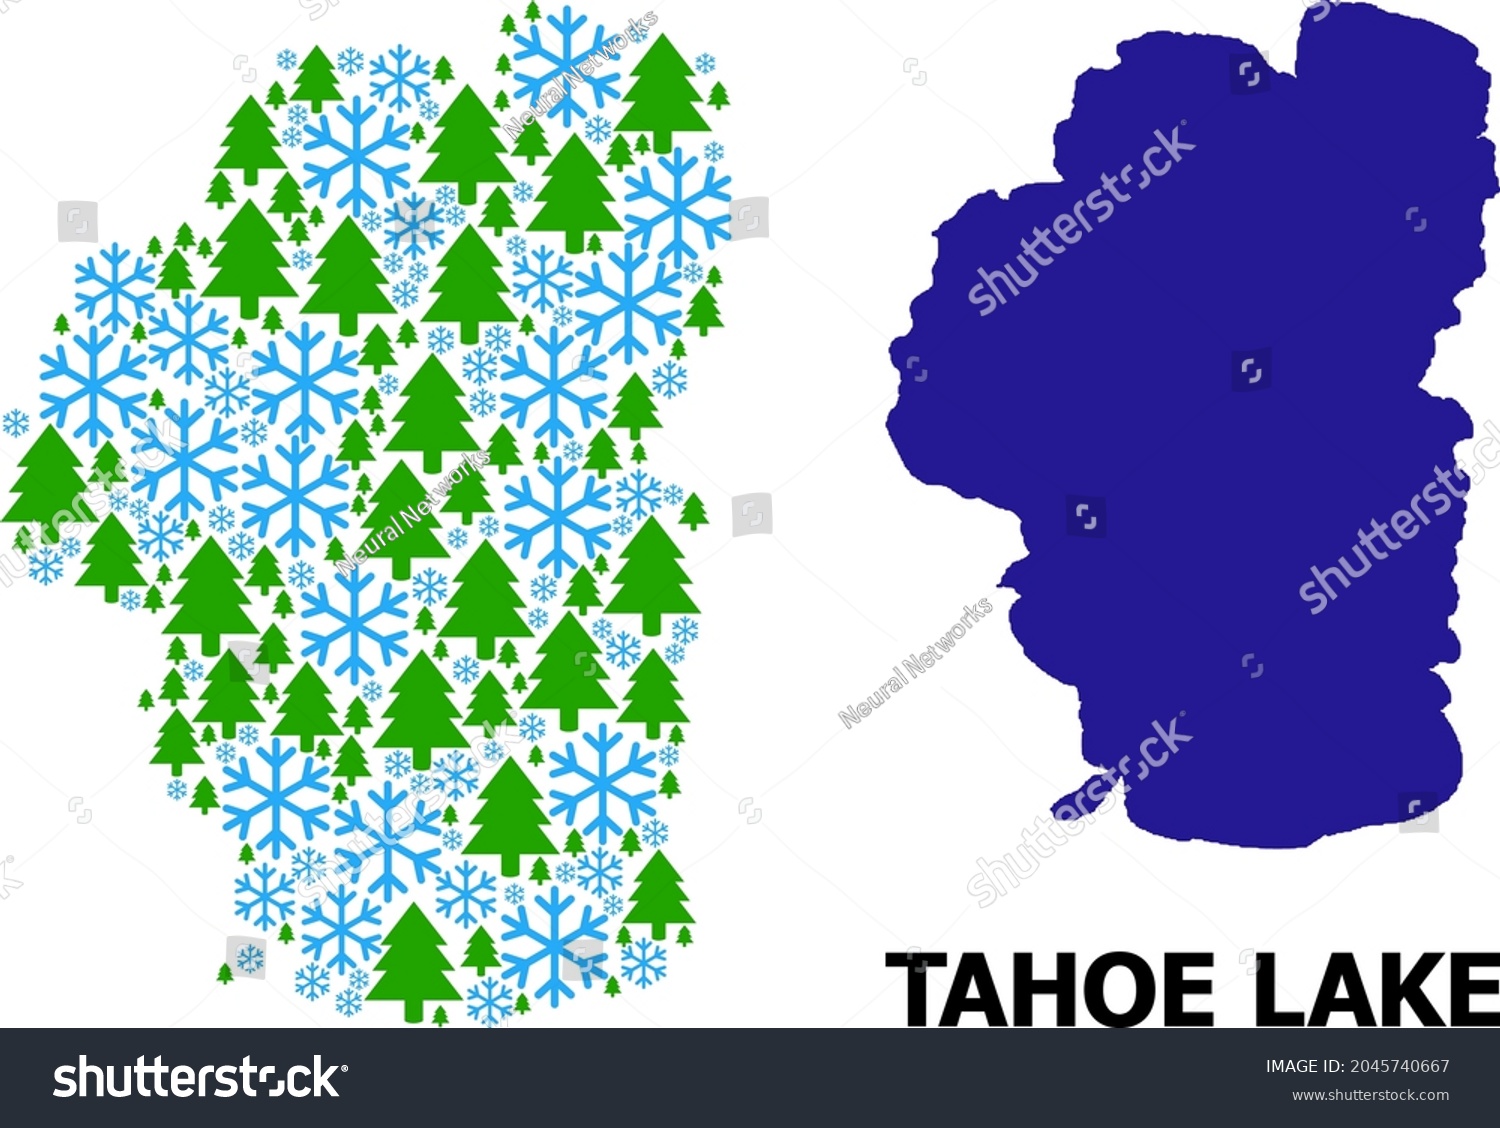 SVG of Vector composition map of Tahoe Lake created for New Year, Christmas, and winter. Mosaic map of Tahoe Lake is created from snow and fir trees. svg